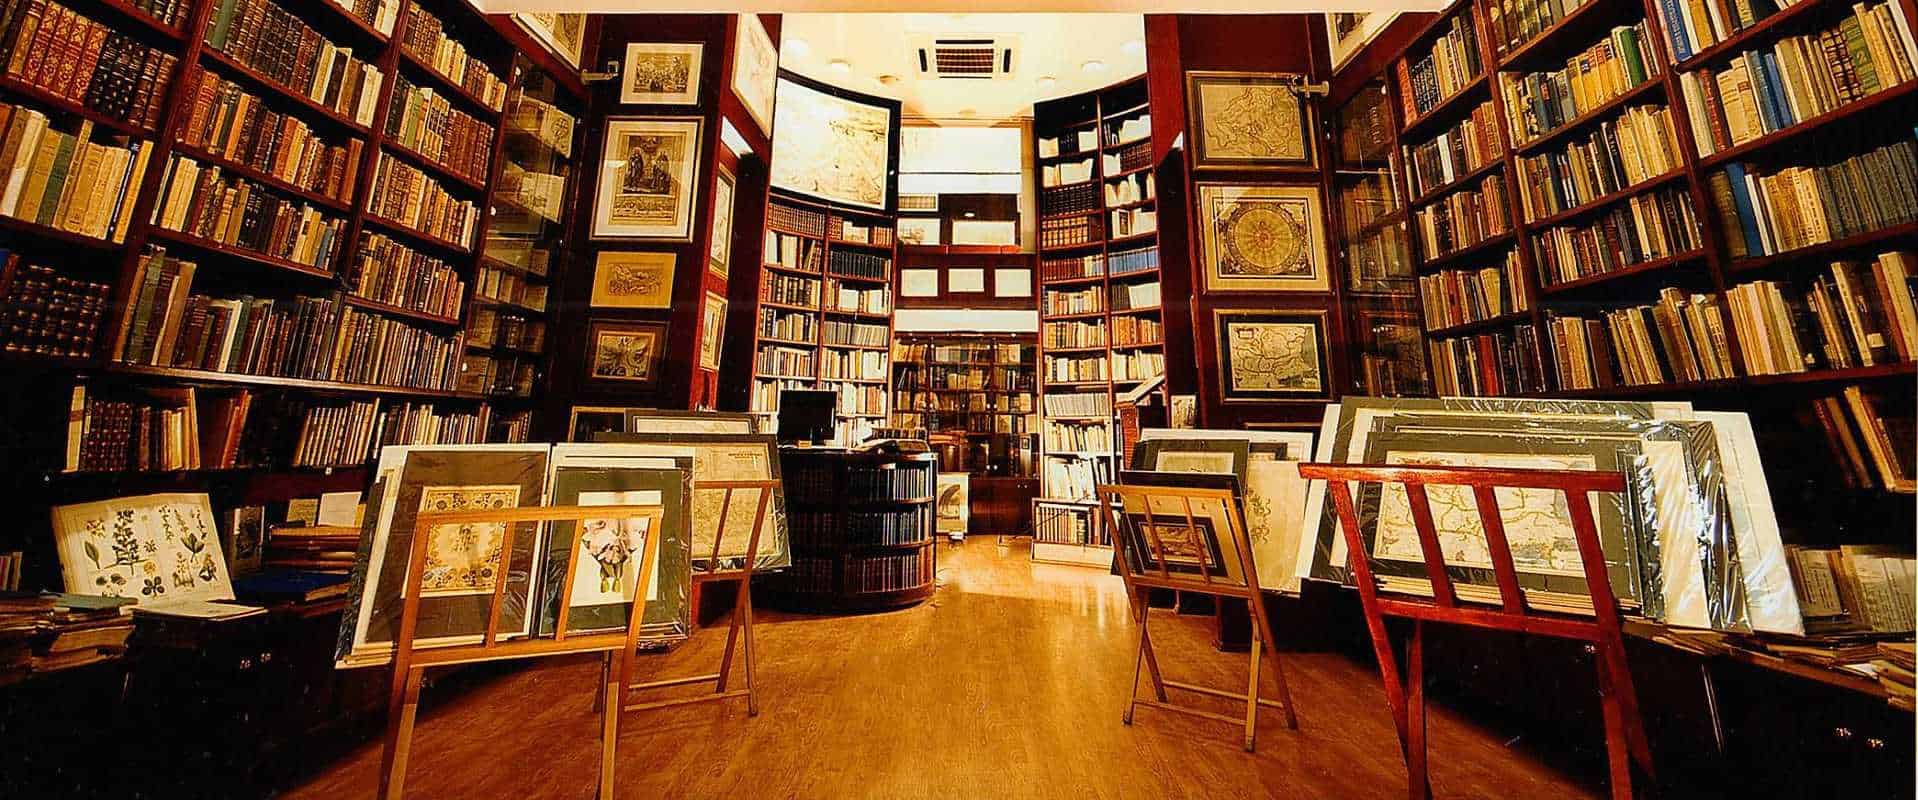 You can find various books and antiques at our store.